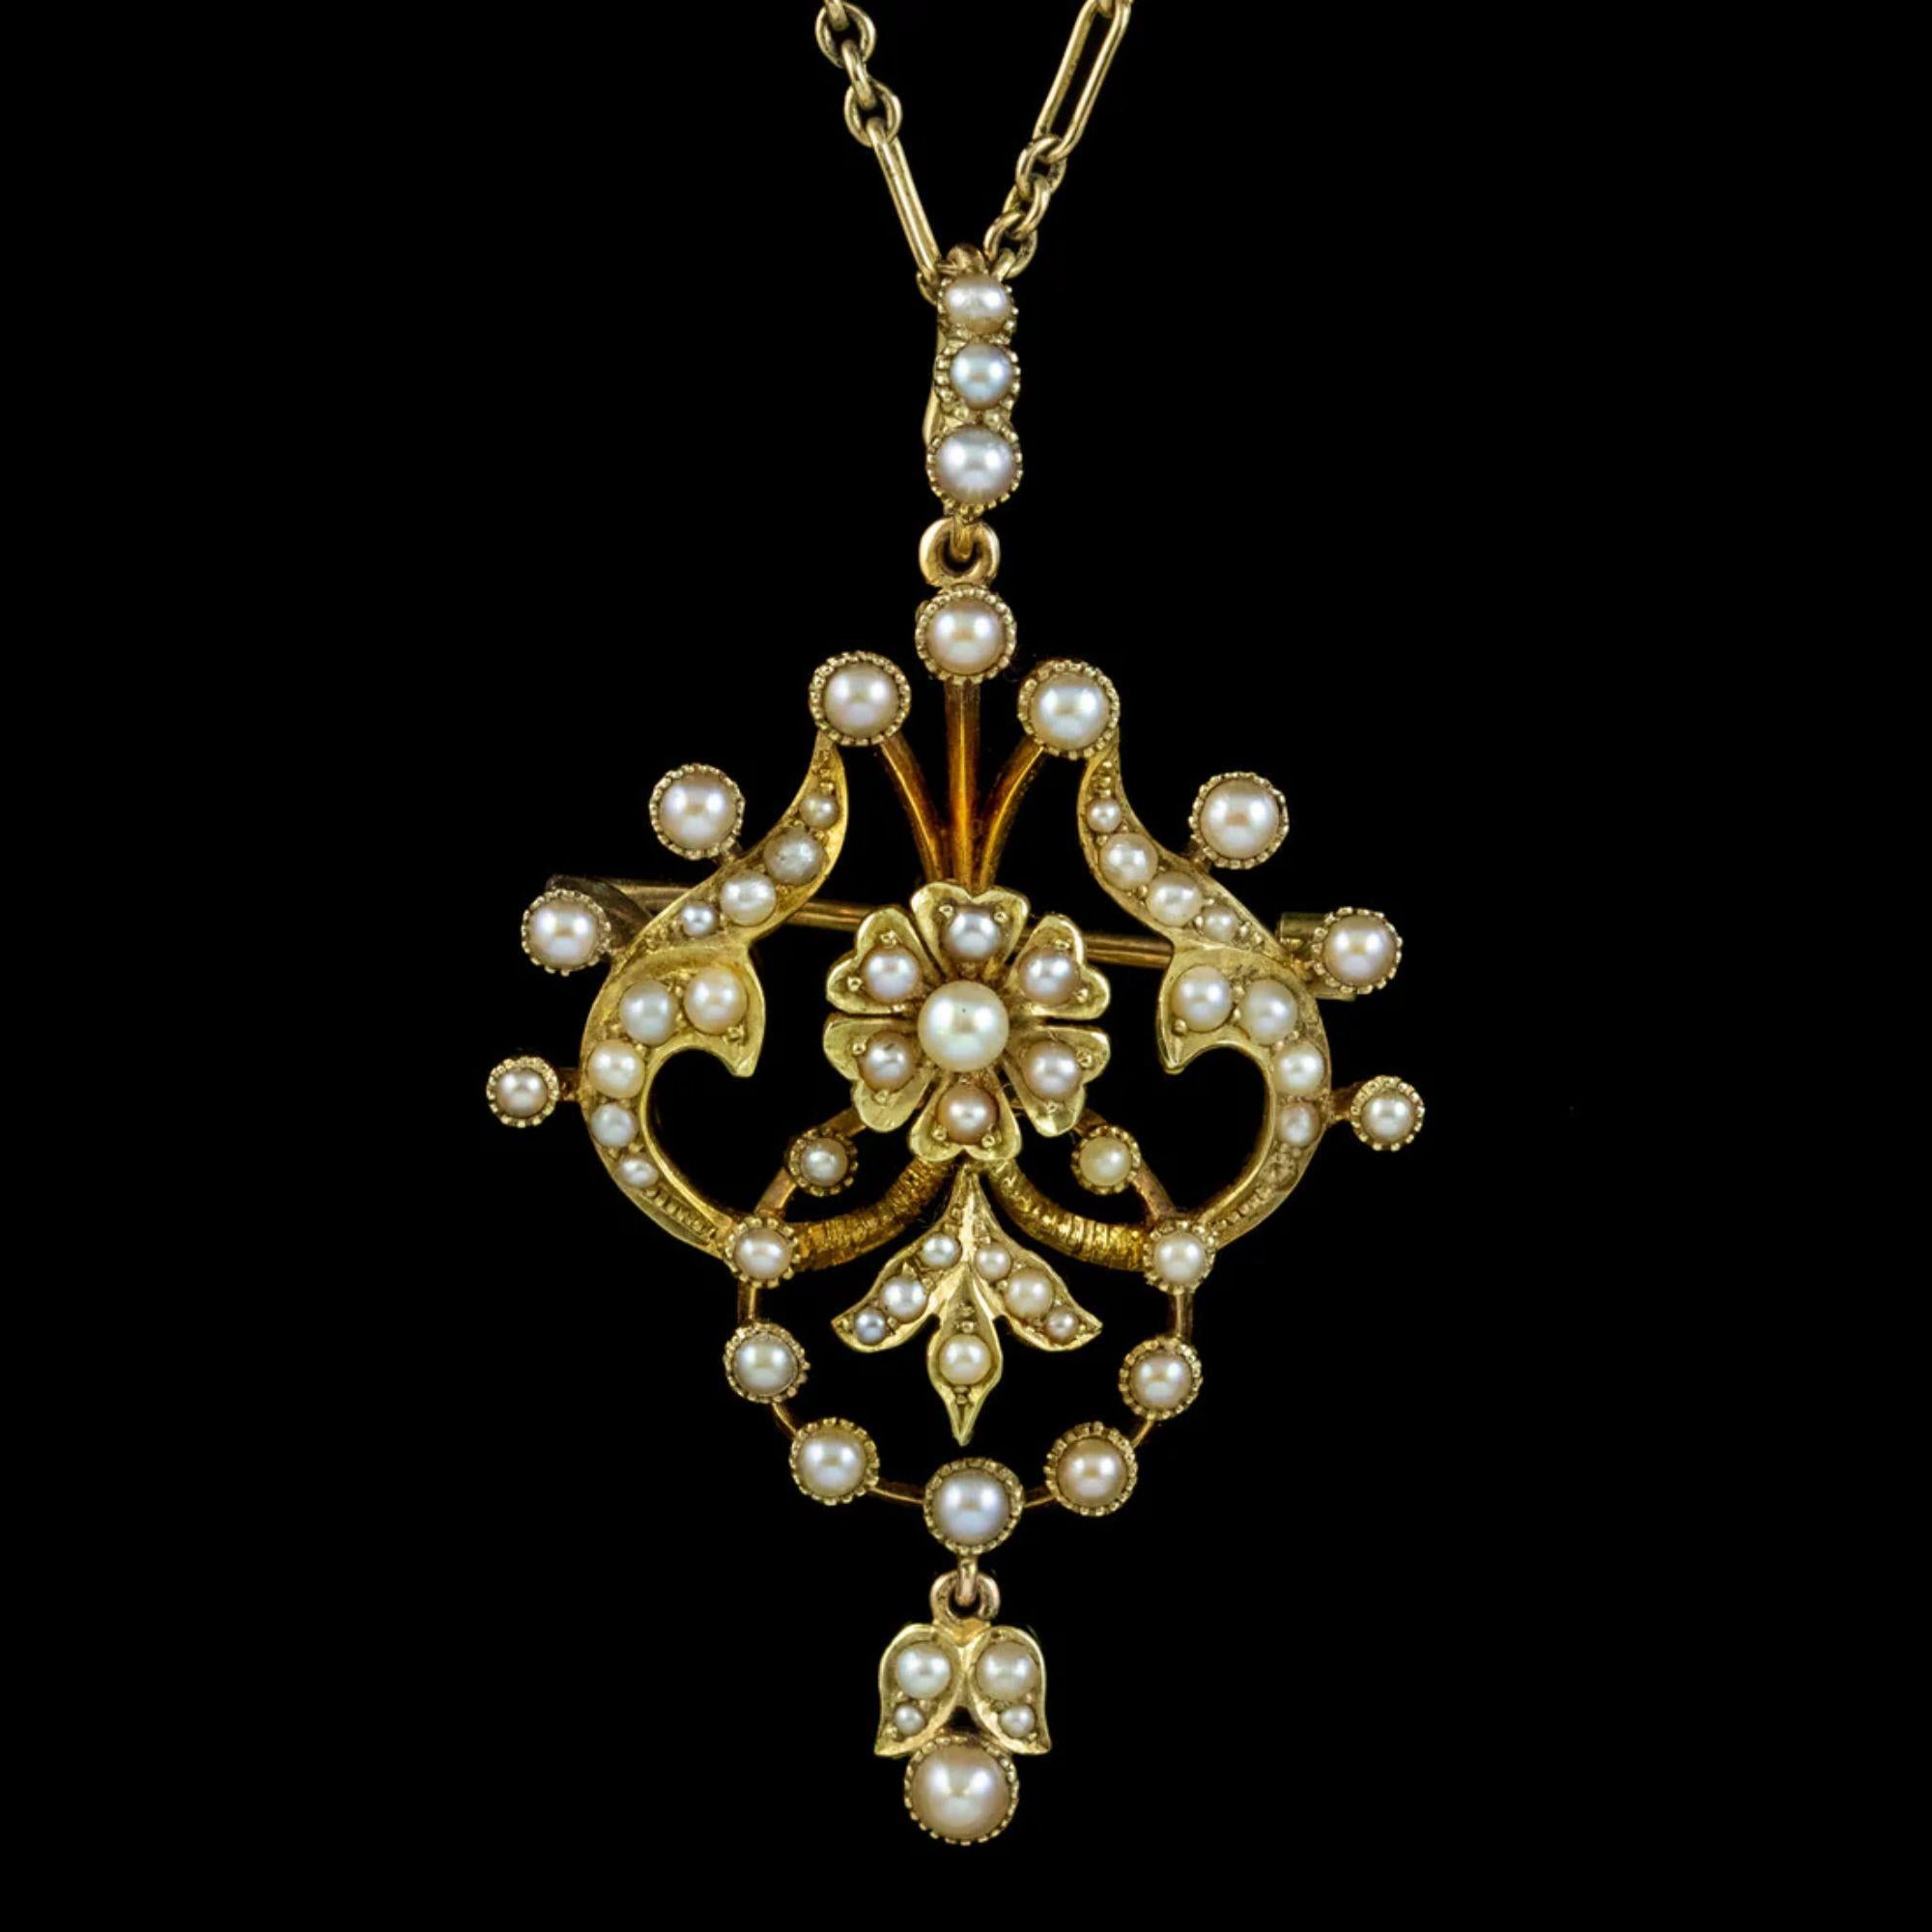 A fabulous antique Art Nouveau pendant from the early 20th Century crafted in 15ct gold. It has a wonderful open-work design, with flowing foliate motifs and a central flower all decorated with gleaming white pearls. 

Pearls are the birthstone of